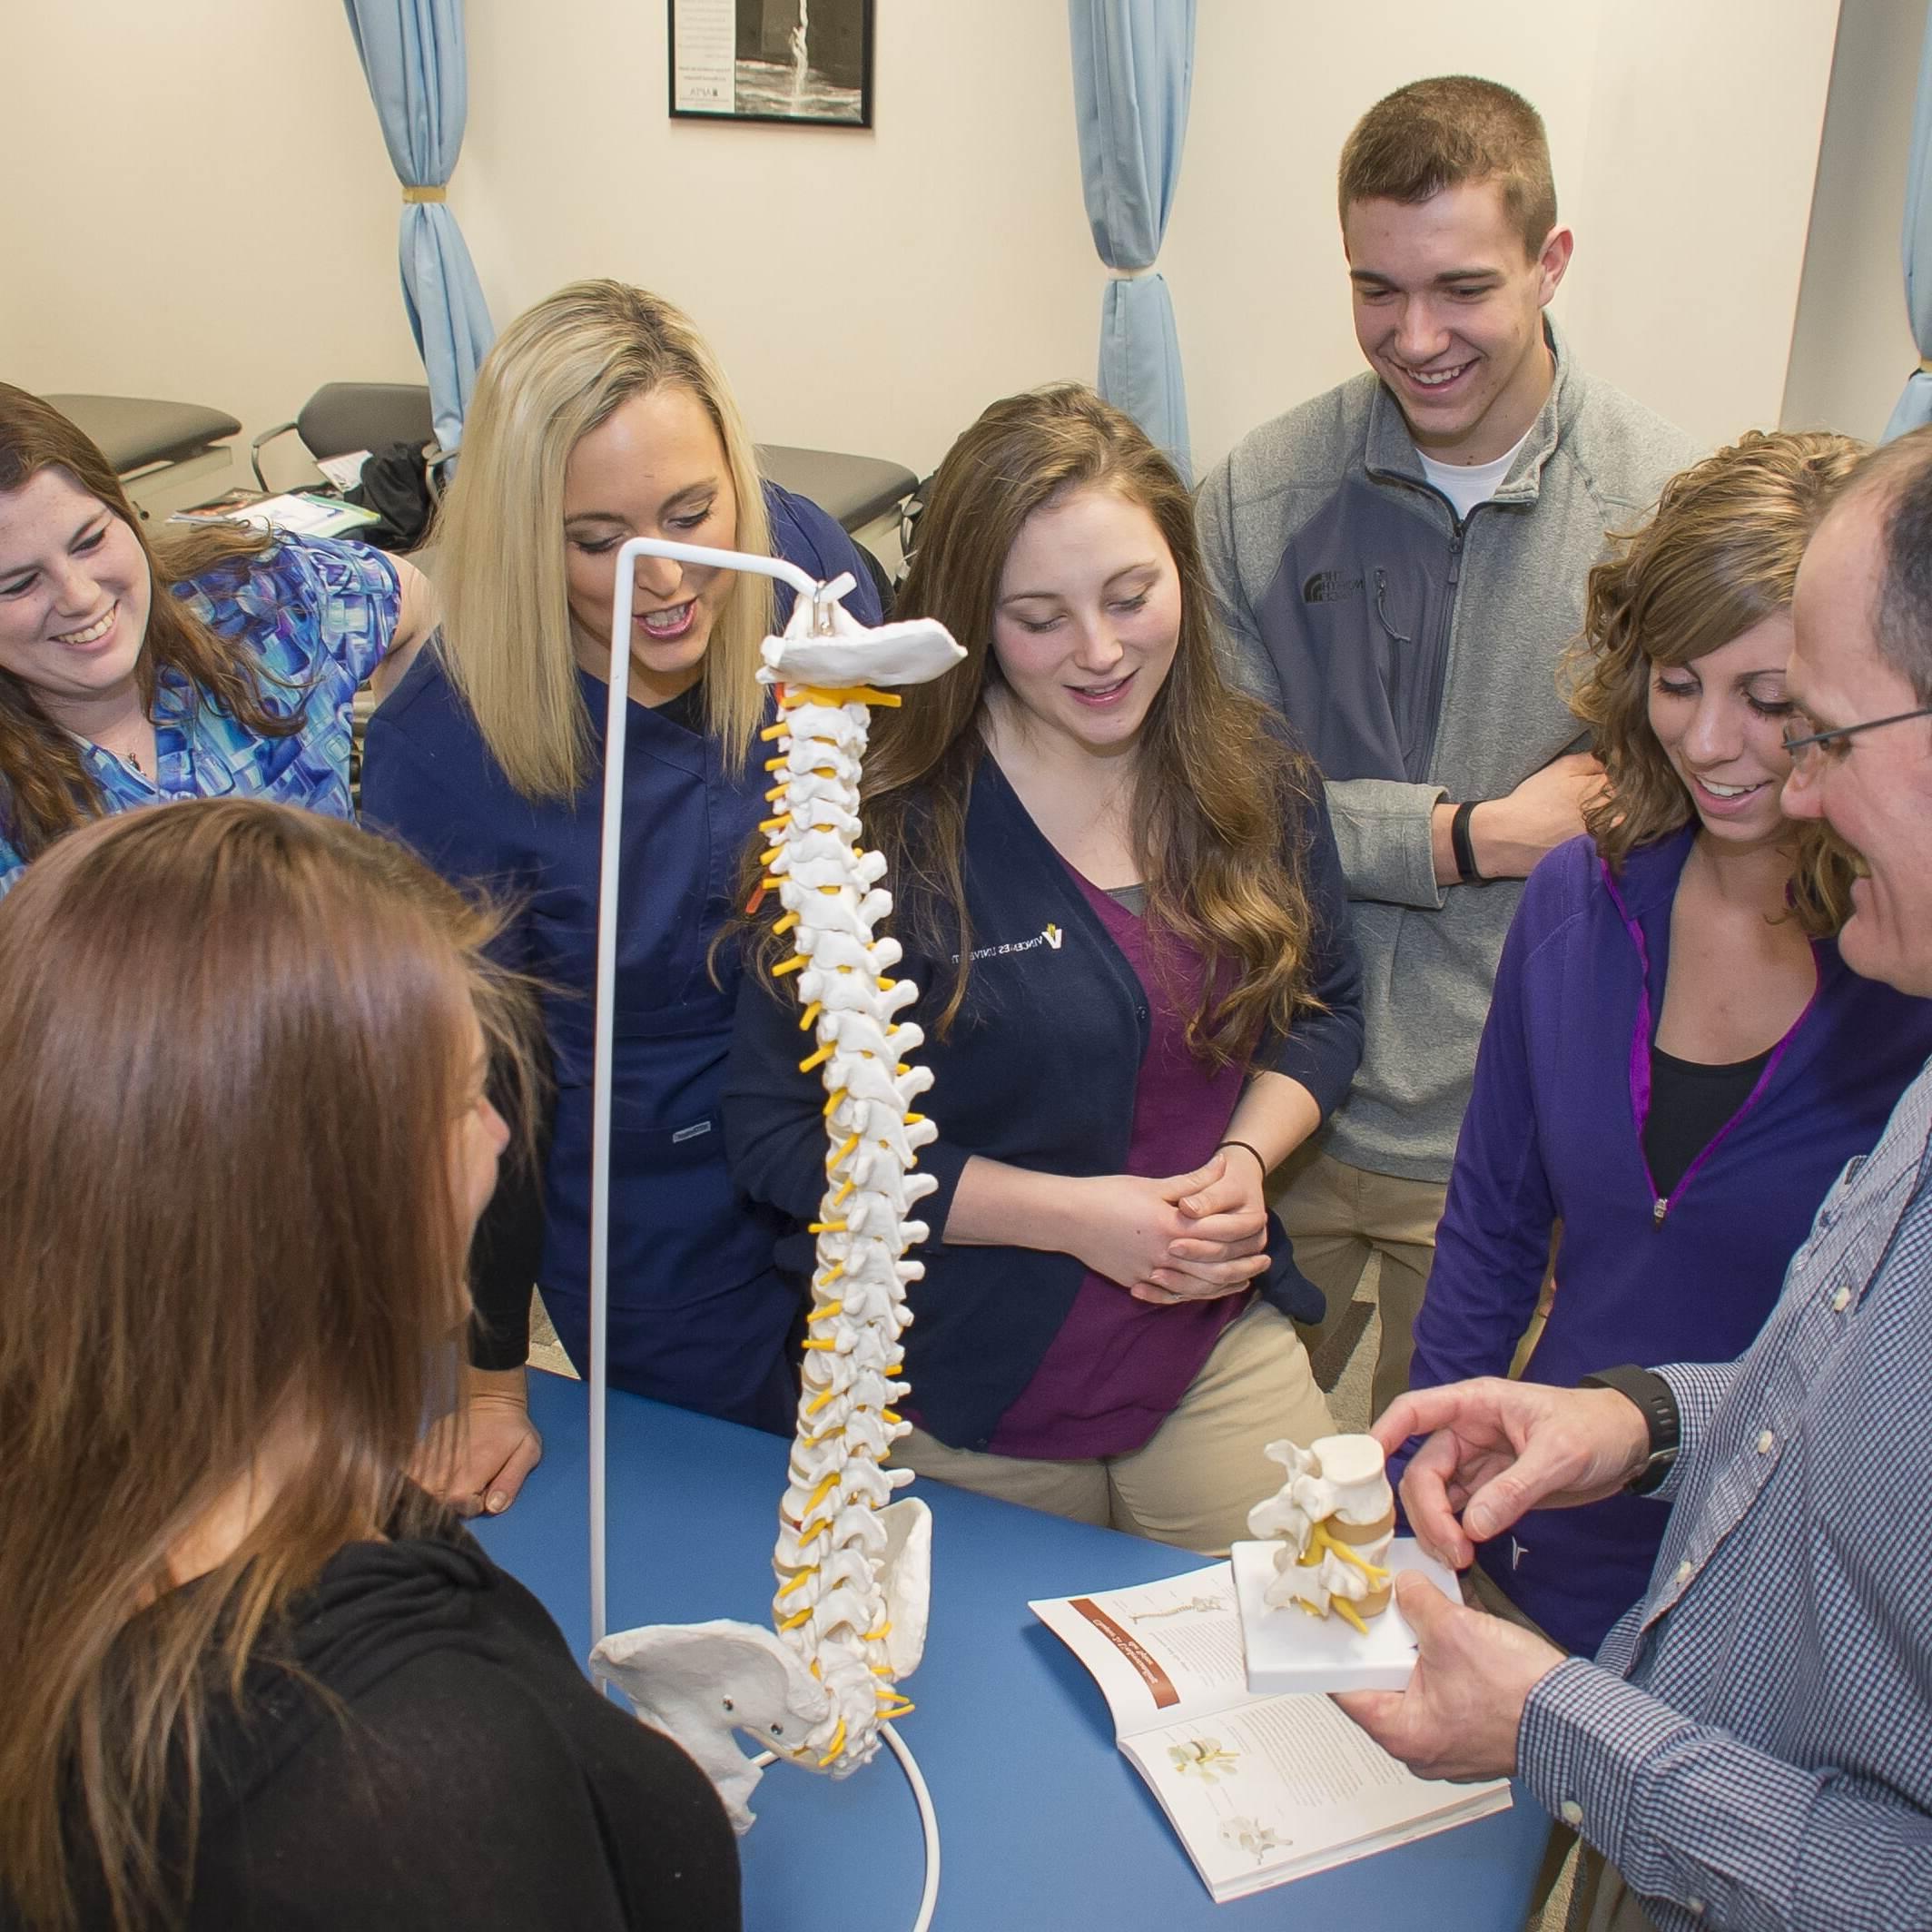 A college professor showing his students the different parts of the human spine